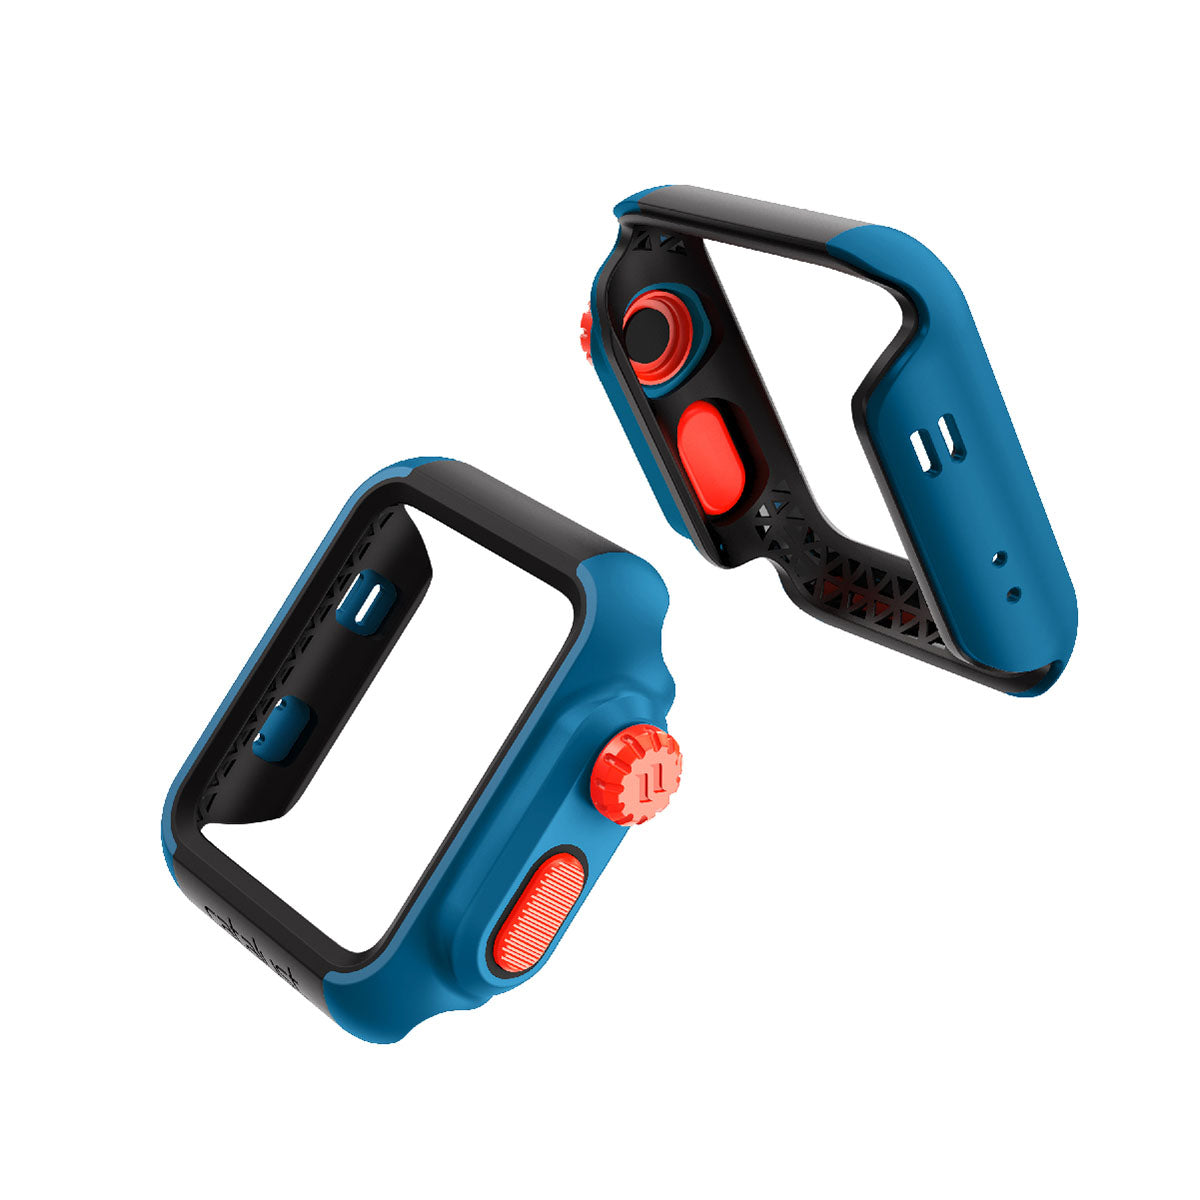 catalyst apple watch series 3 2 42mm impact protection case views of all the sides of the impact protection case blue ridge sunset